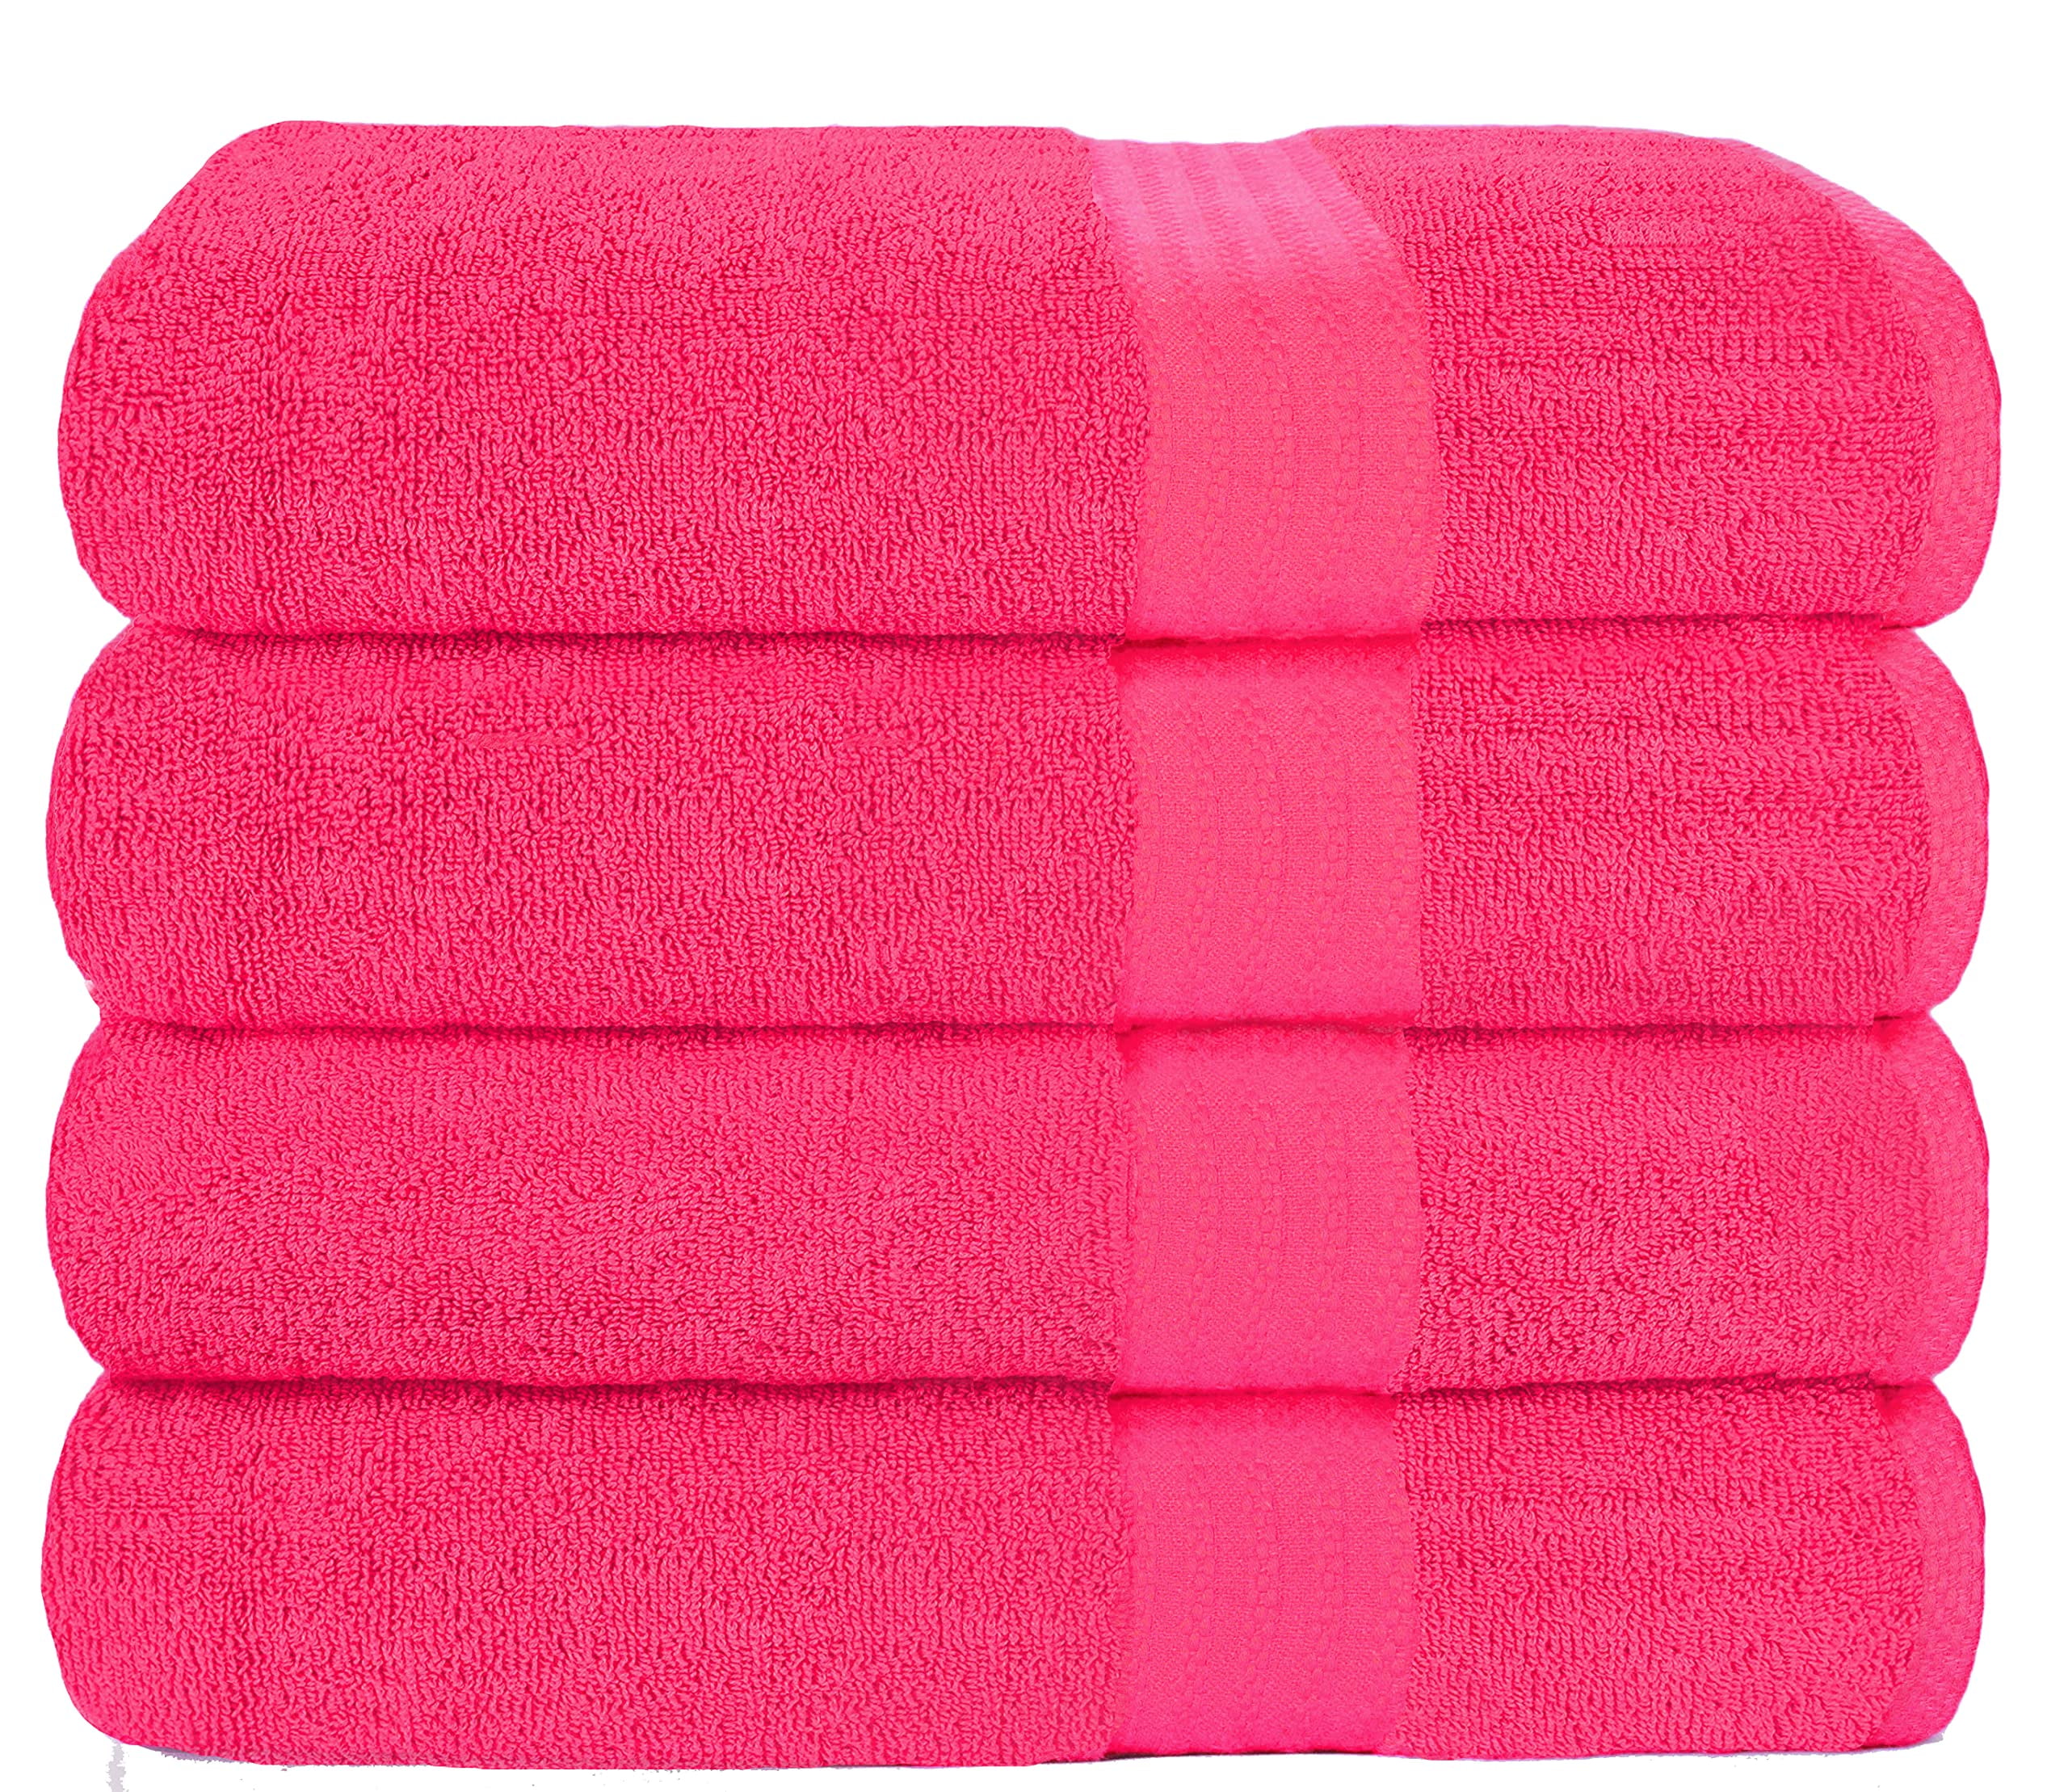 Best bath towels: how to pick super-soft & ultra-absorbent designs – The  Fine Cotton Company